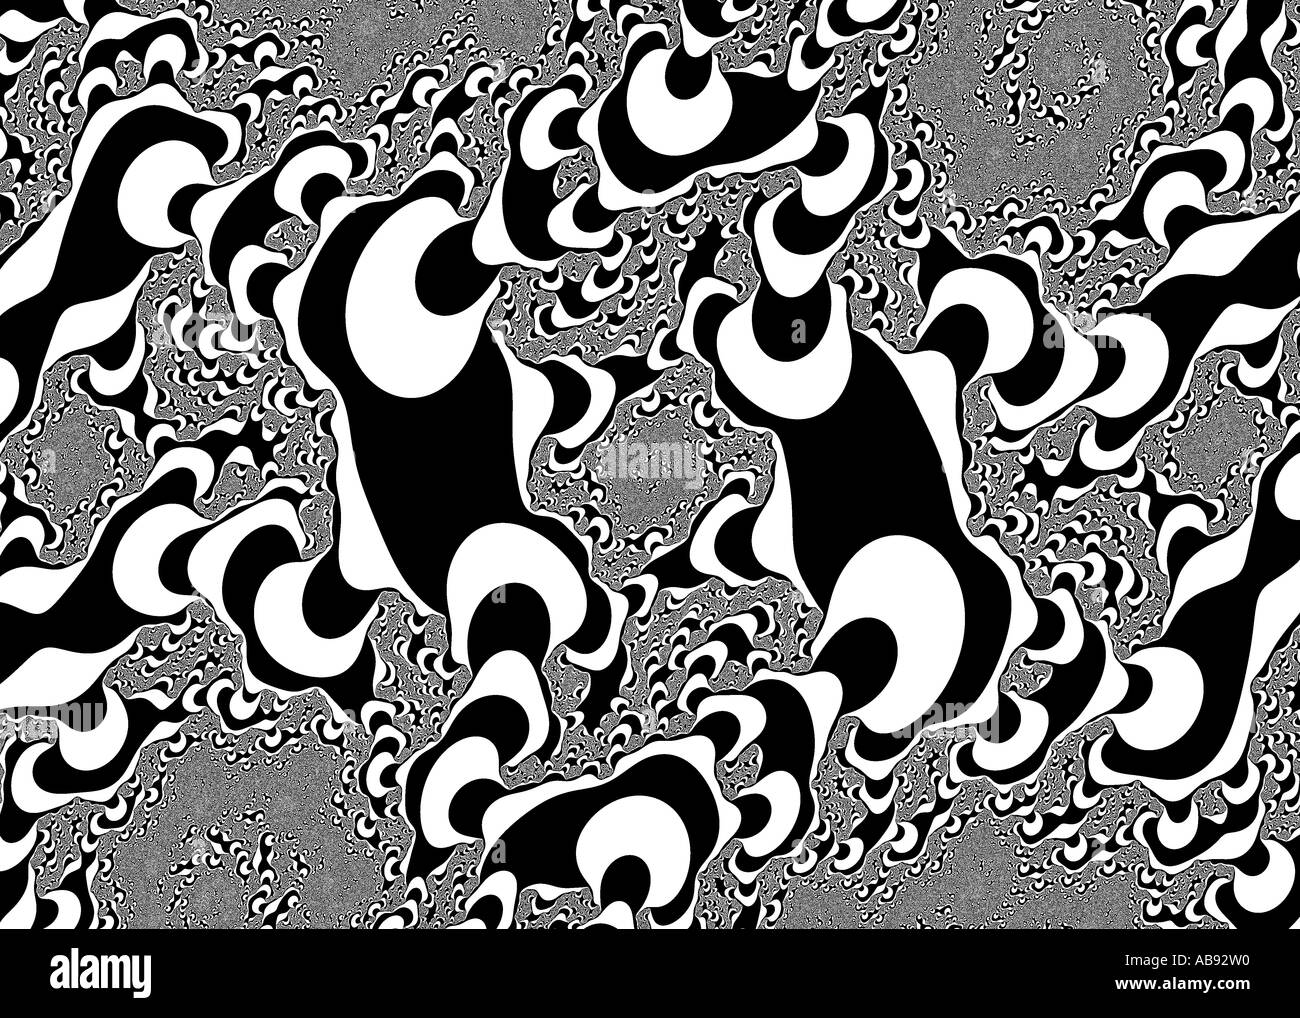 Computer Generated Fractal Image in Black and White with a rhythmic dance like feel Stock Photo